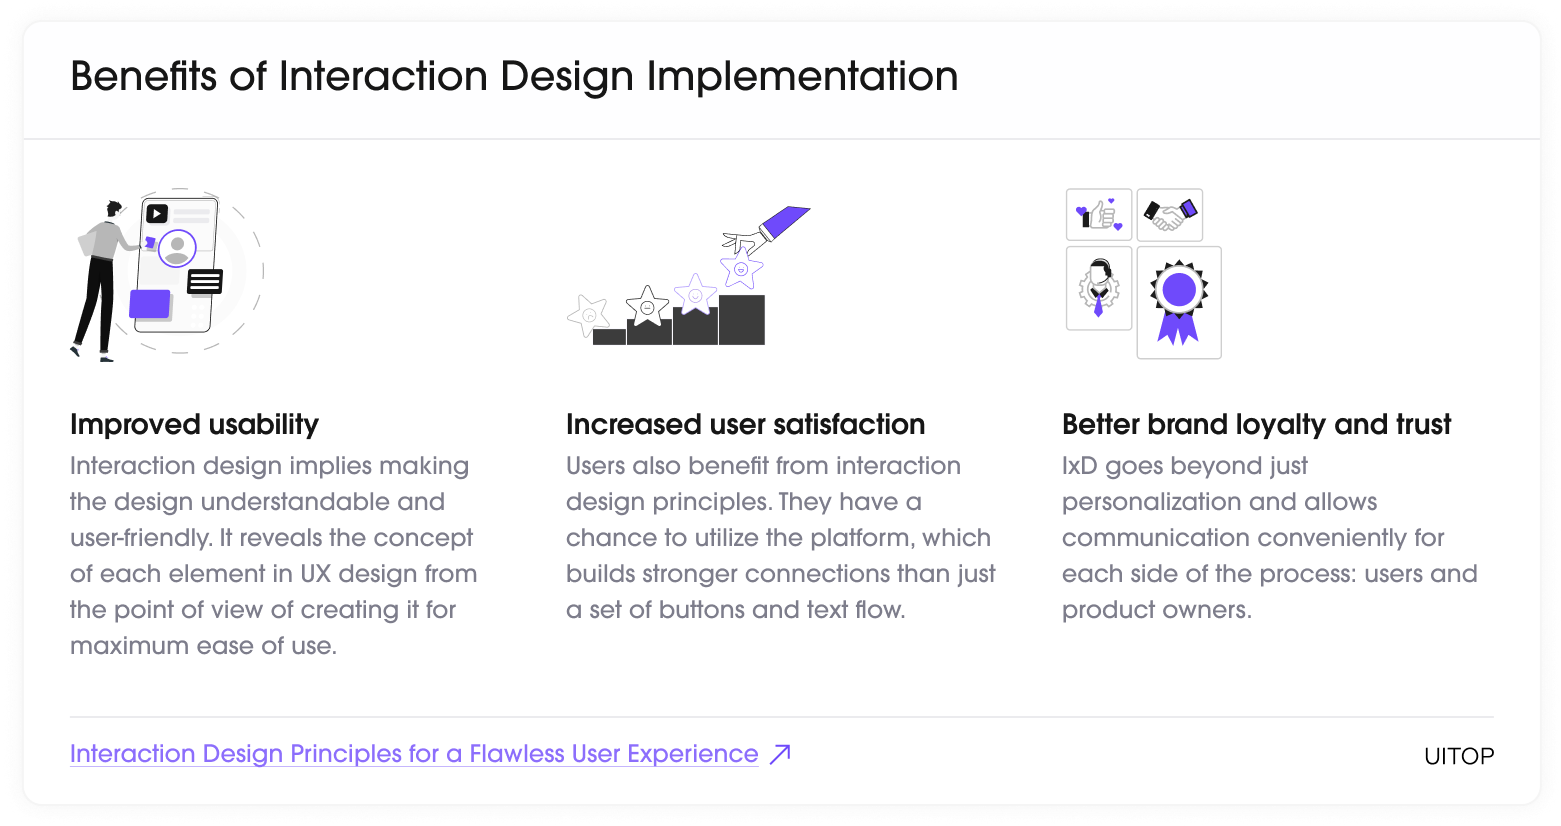 Benefits of Interaction Design Implementation